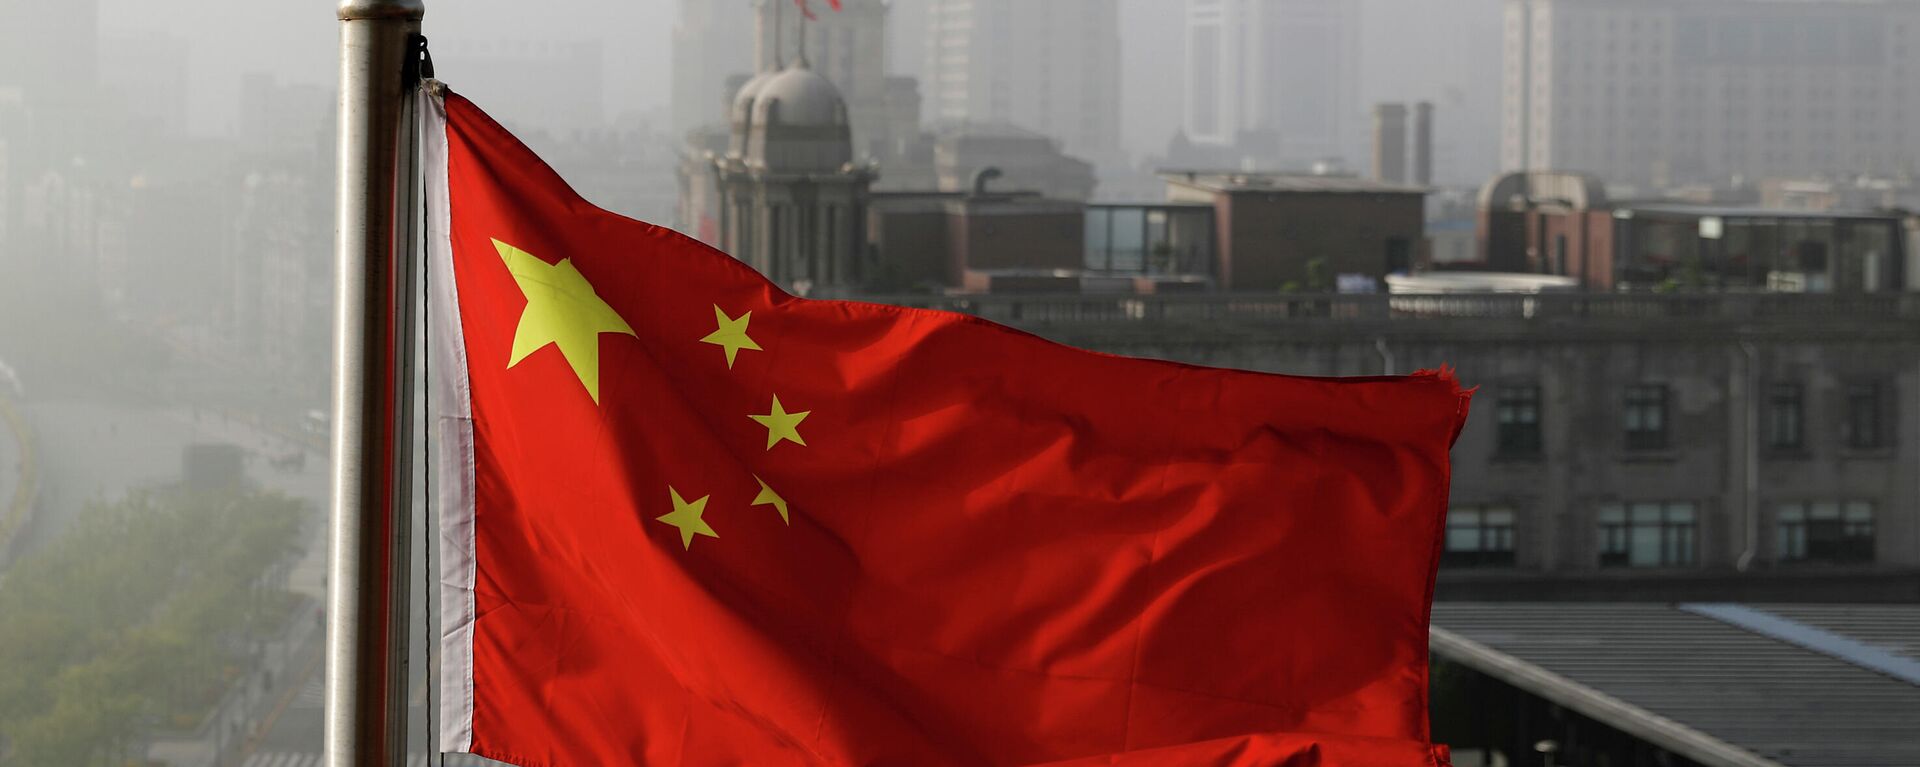 In this April 14, 2016 file photo, a Chinese national flag flutters against the office buildings in Shanghai, China.  - Sputnik International, 1920, 20.06.2022